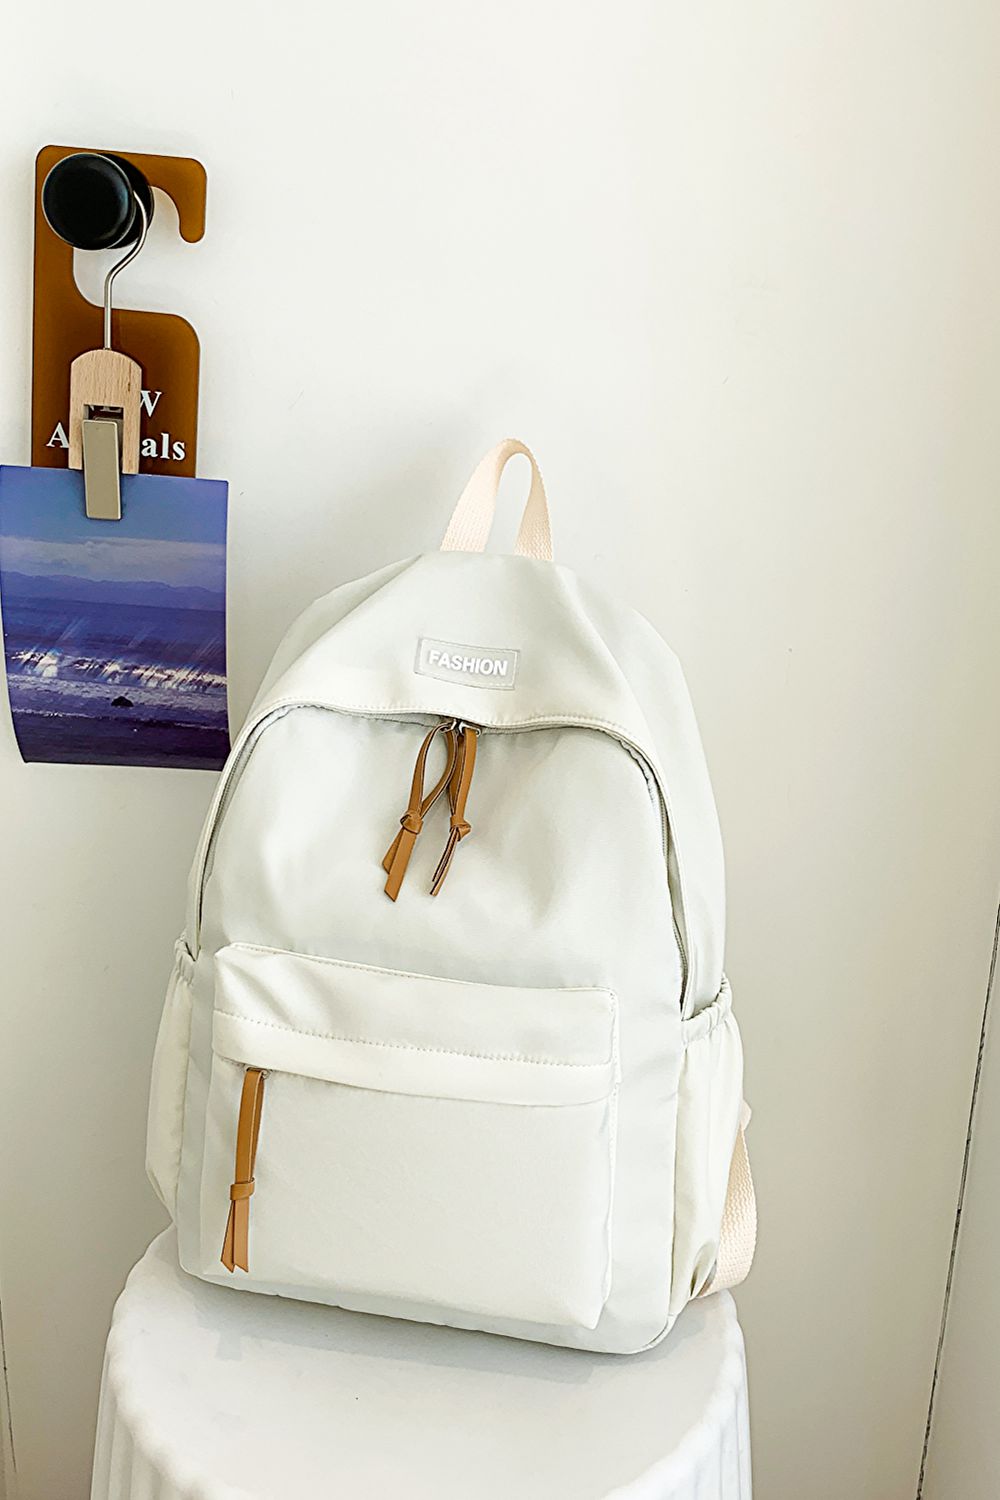 Uylee's Boutique FASHION Polyester Backpack